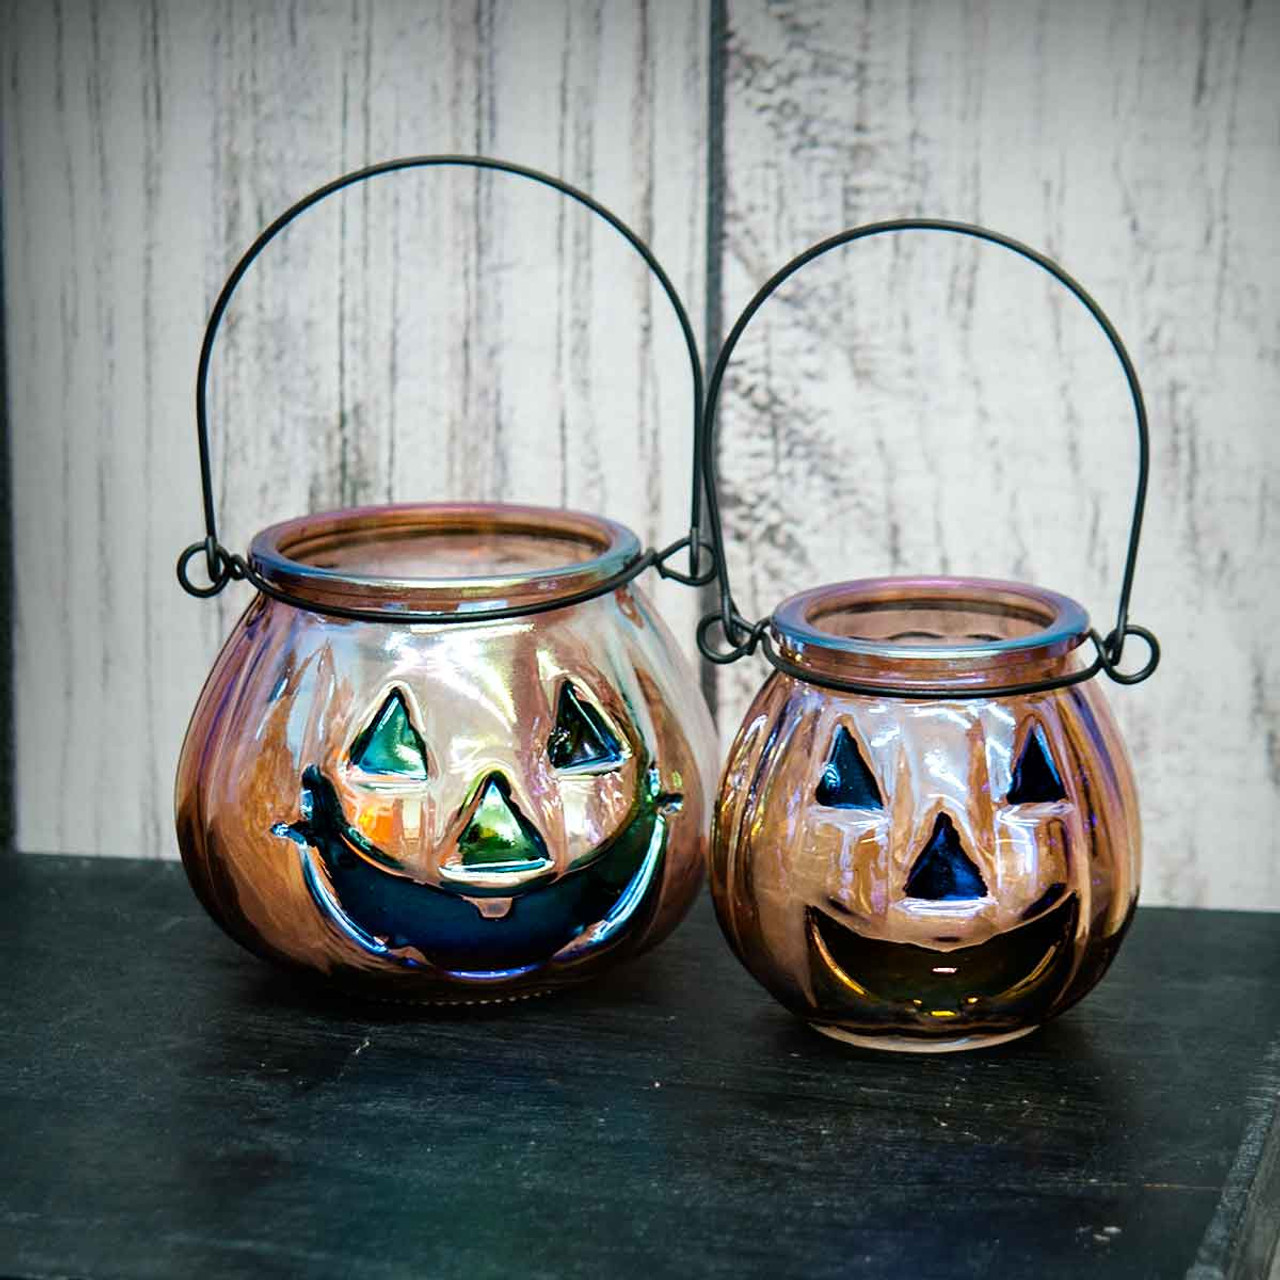 Pumpkin Glass Candle Holder 10cm (7.5cm at right)